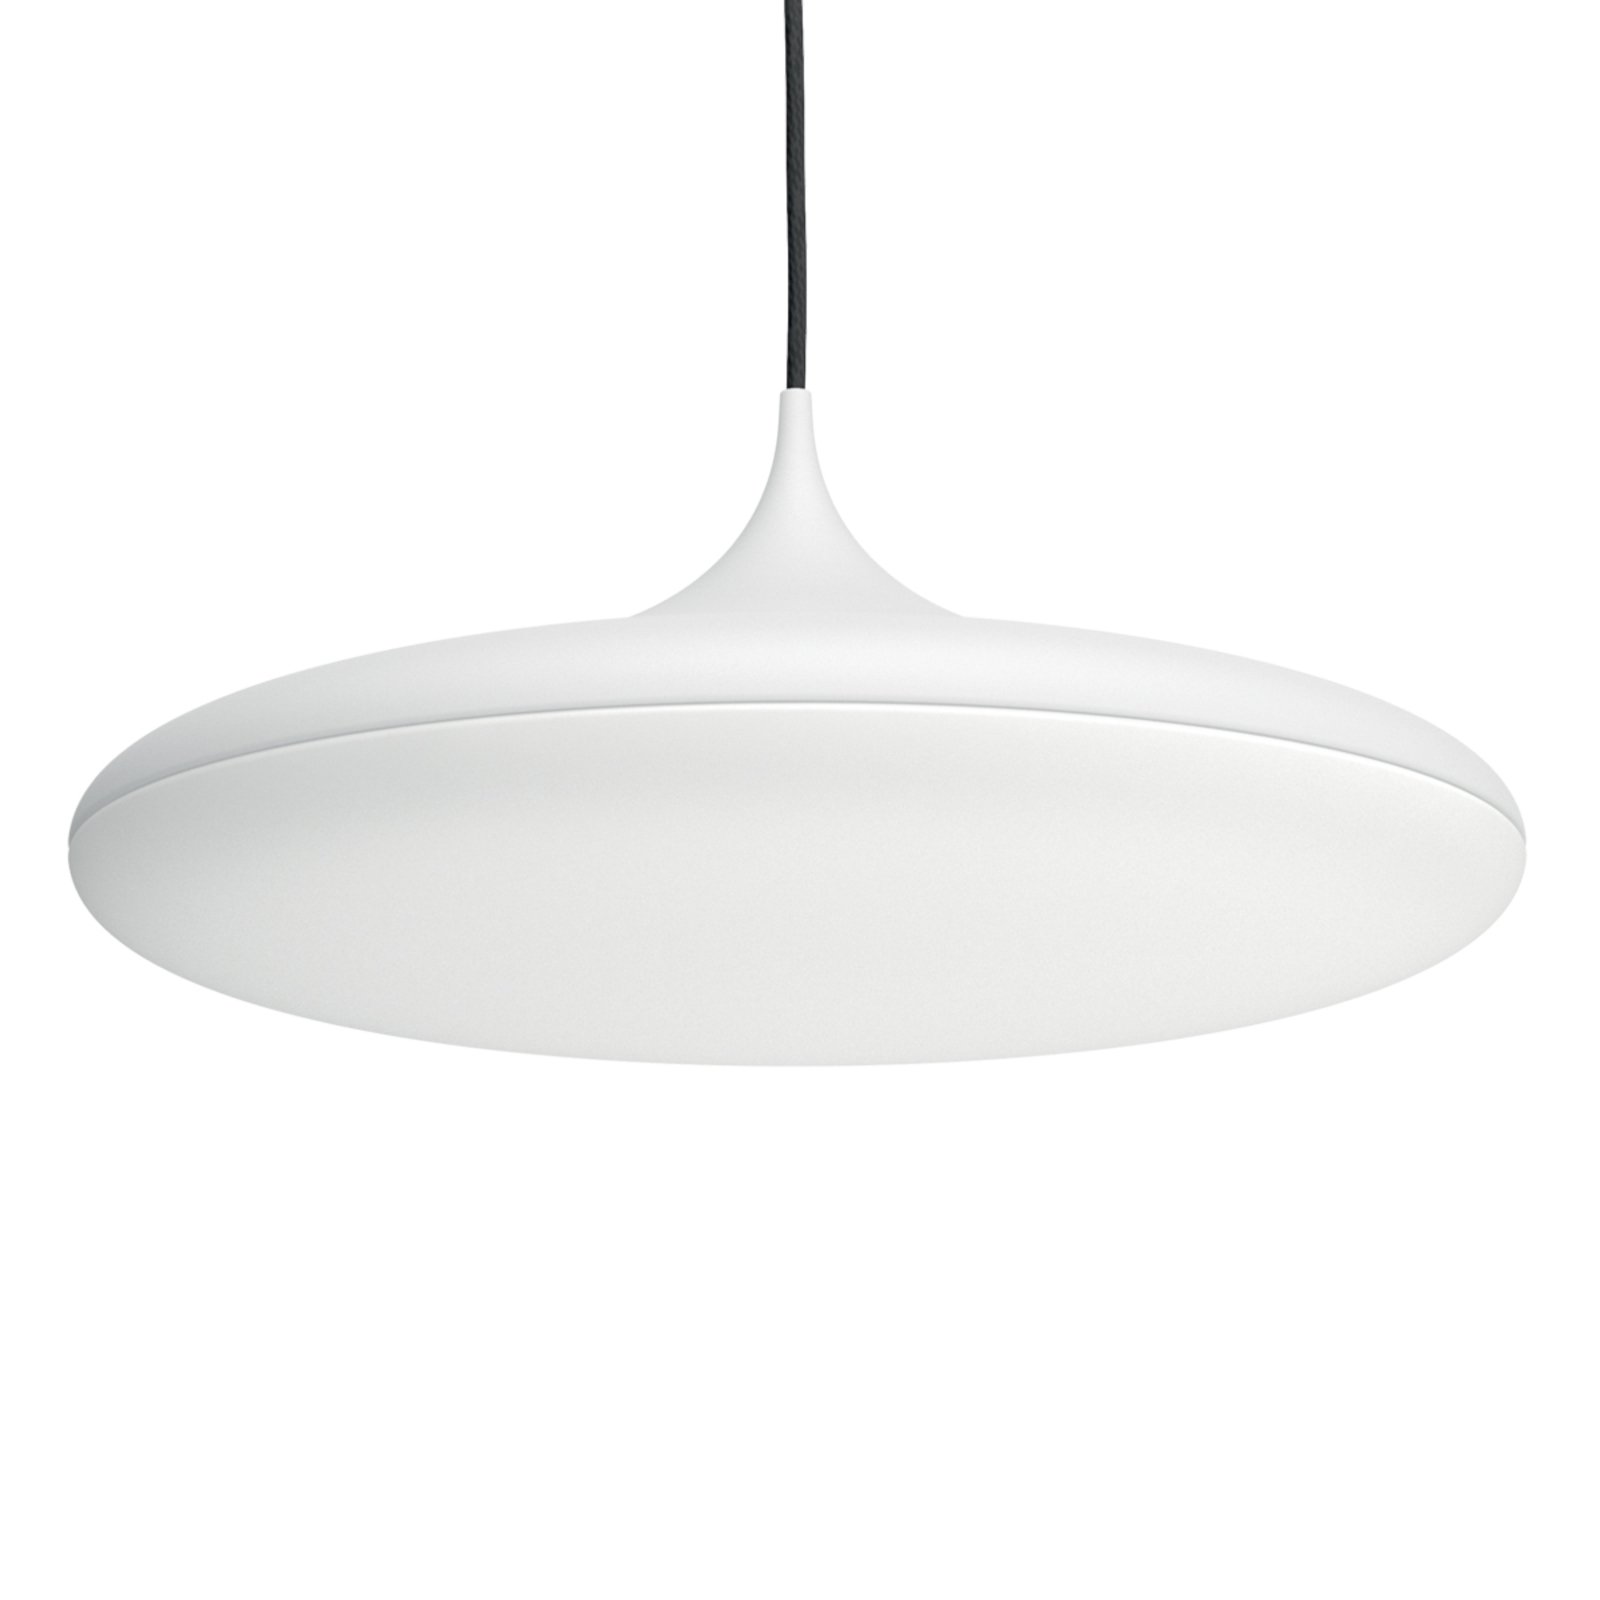 Philips Hue White Ambiance Cher hanglamp wit